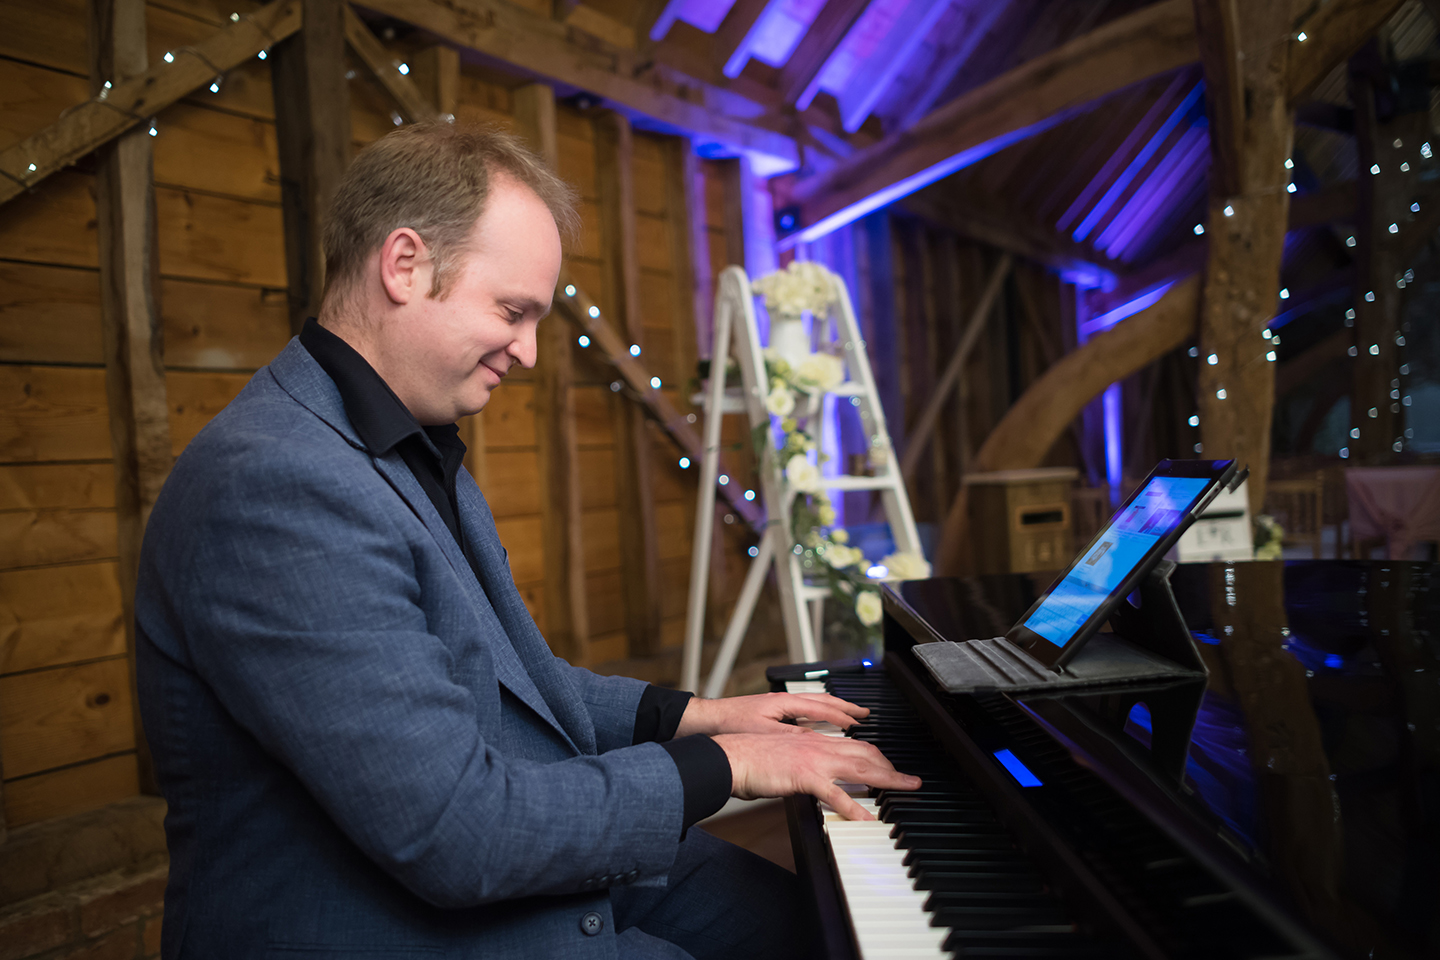 A wedding pianist plays for guests during a tasting event at Bassmead Manor Barns